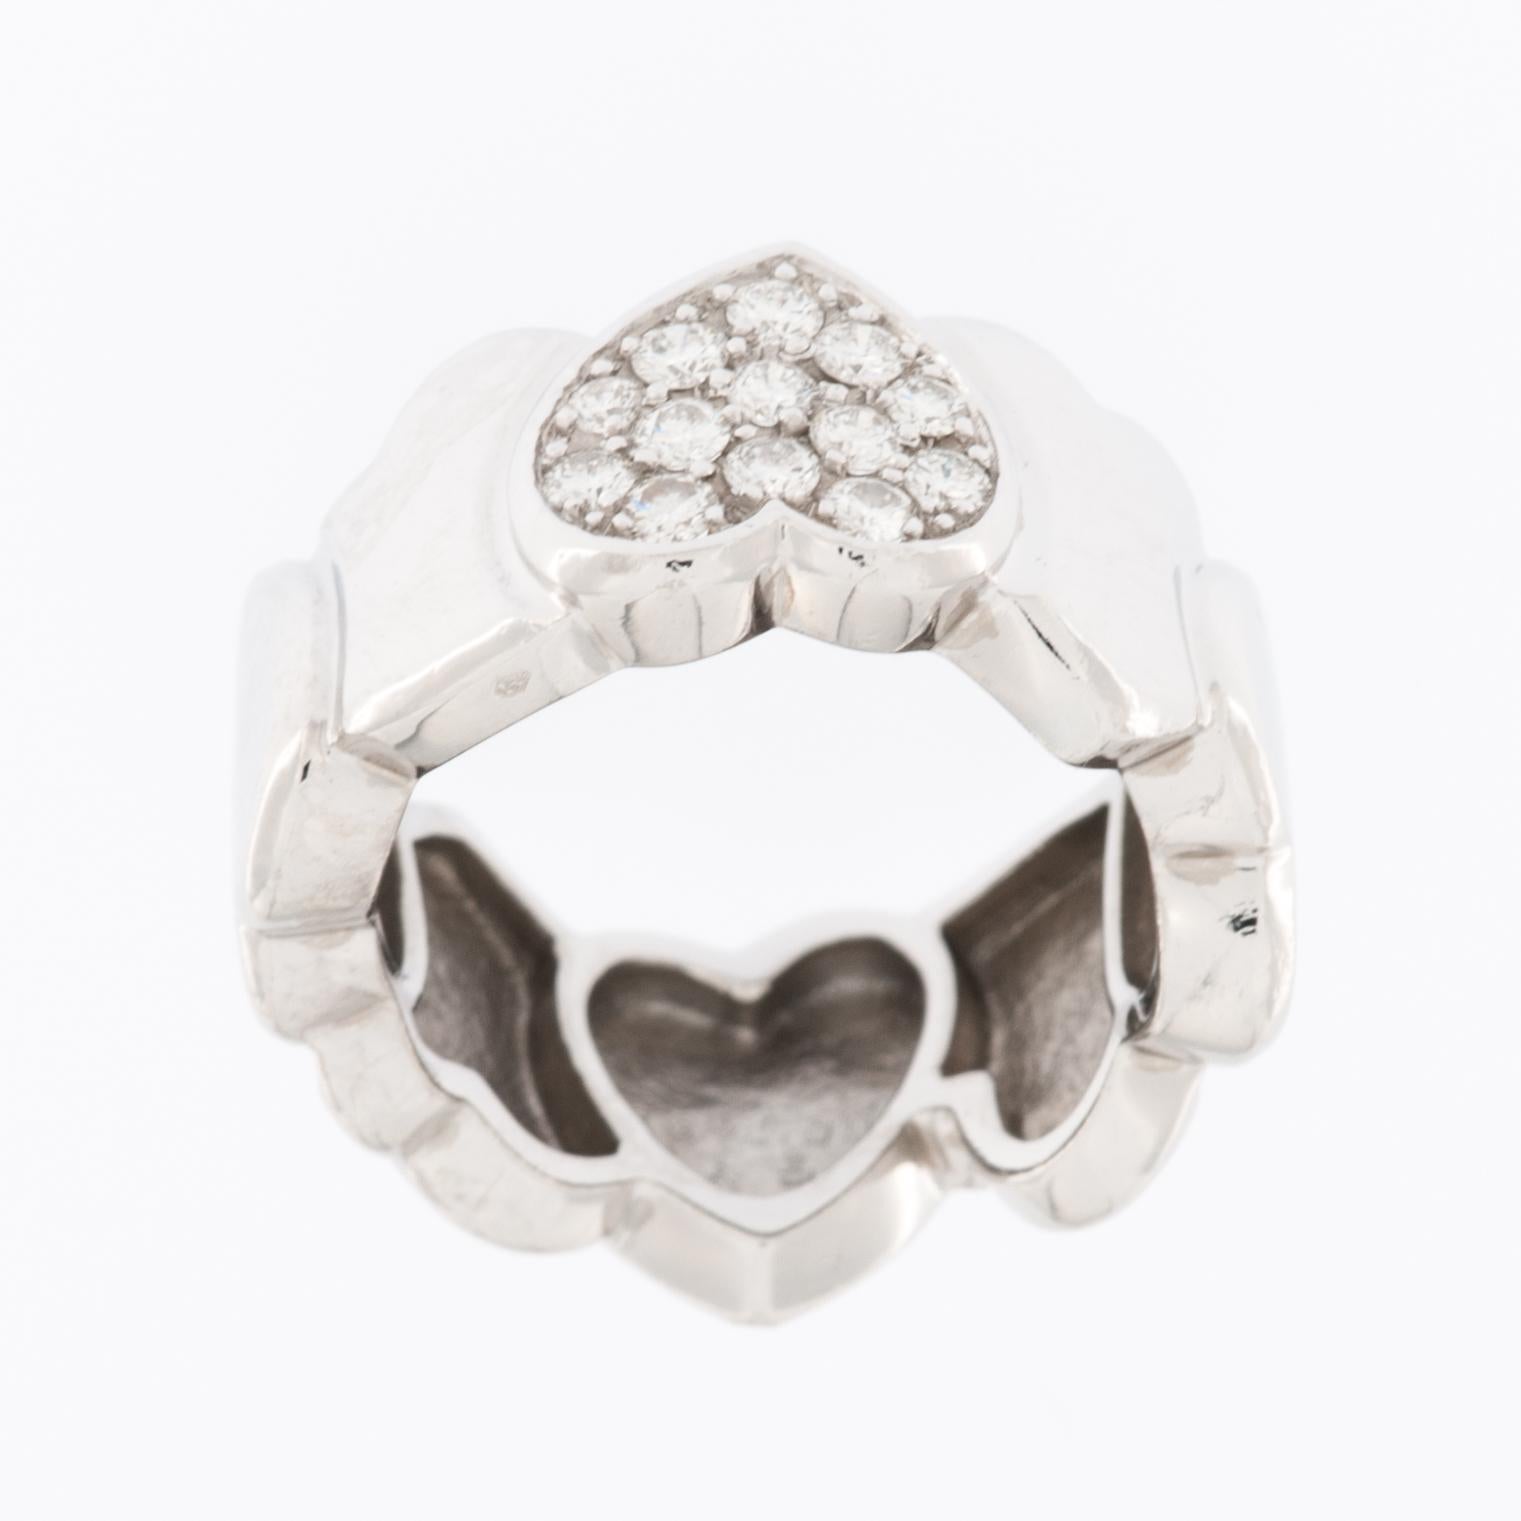 The FRED PARIS Heart Diamond Ring is a luxurious and exquisite piece of jewelry crafted from 18kt white gold. This ring is designed to be a symbol of love and affection and it's composed from 8 hearts. 

The ring is made from 18kt white gold, which